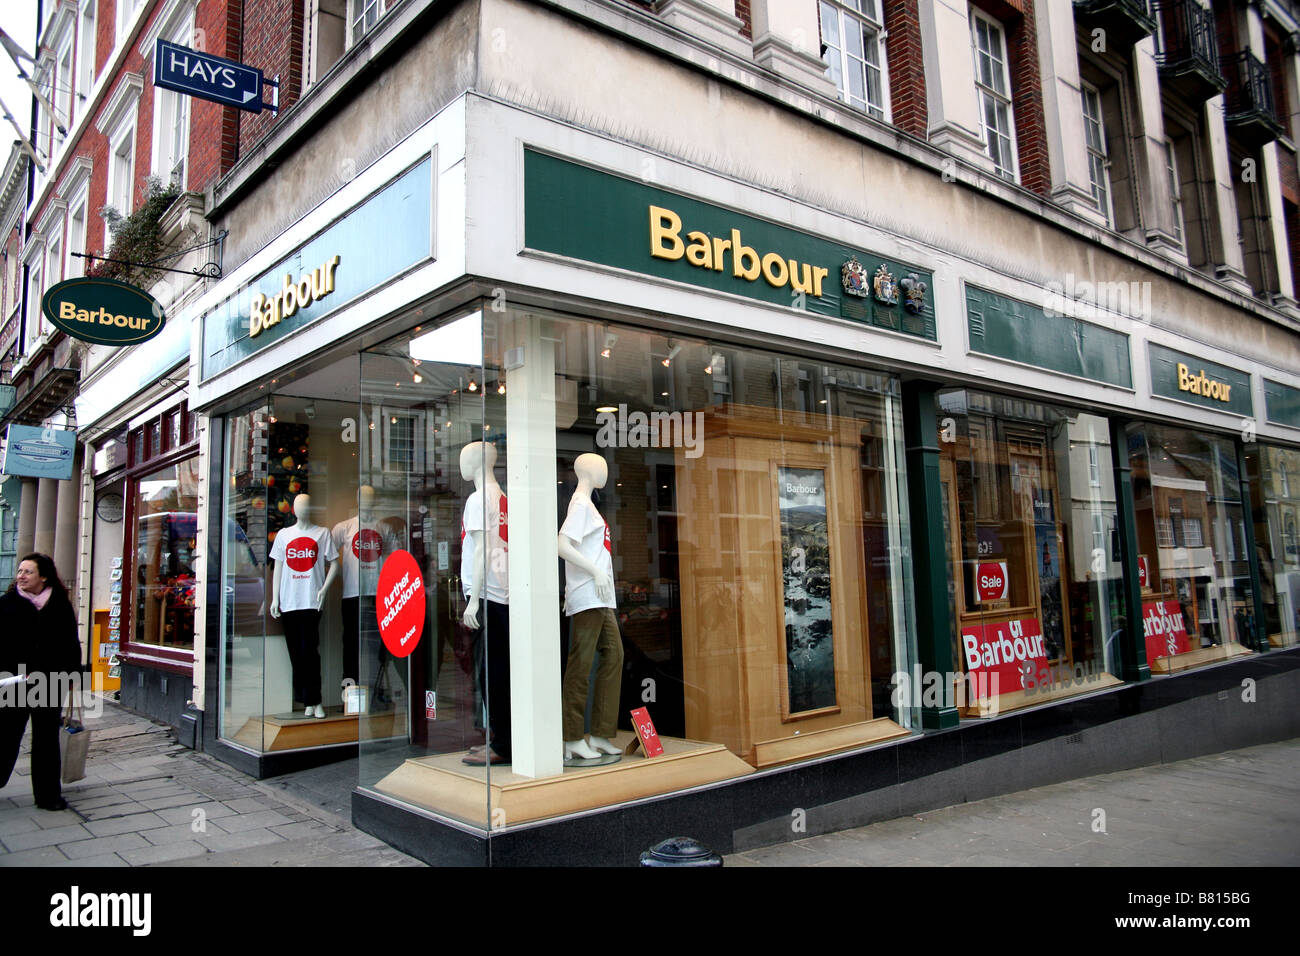 Barbour Store High Resolution Stock Photography and Images - Alamy